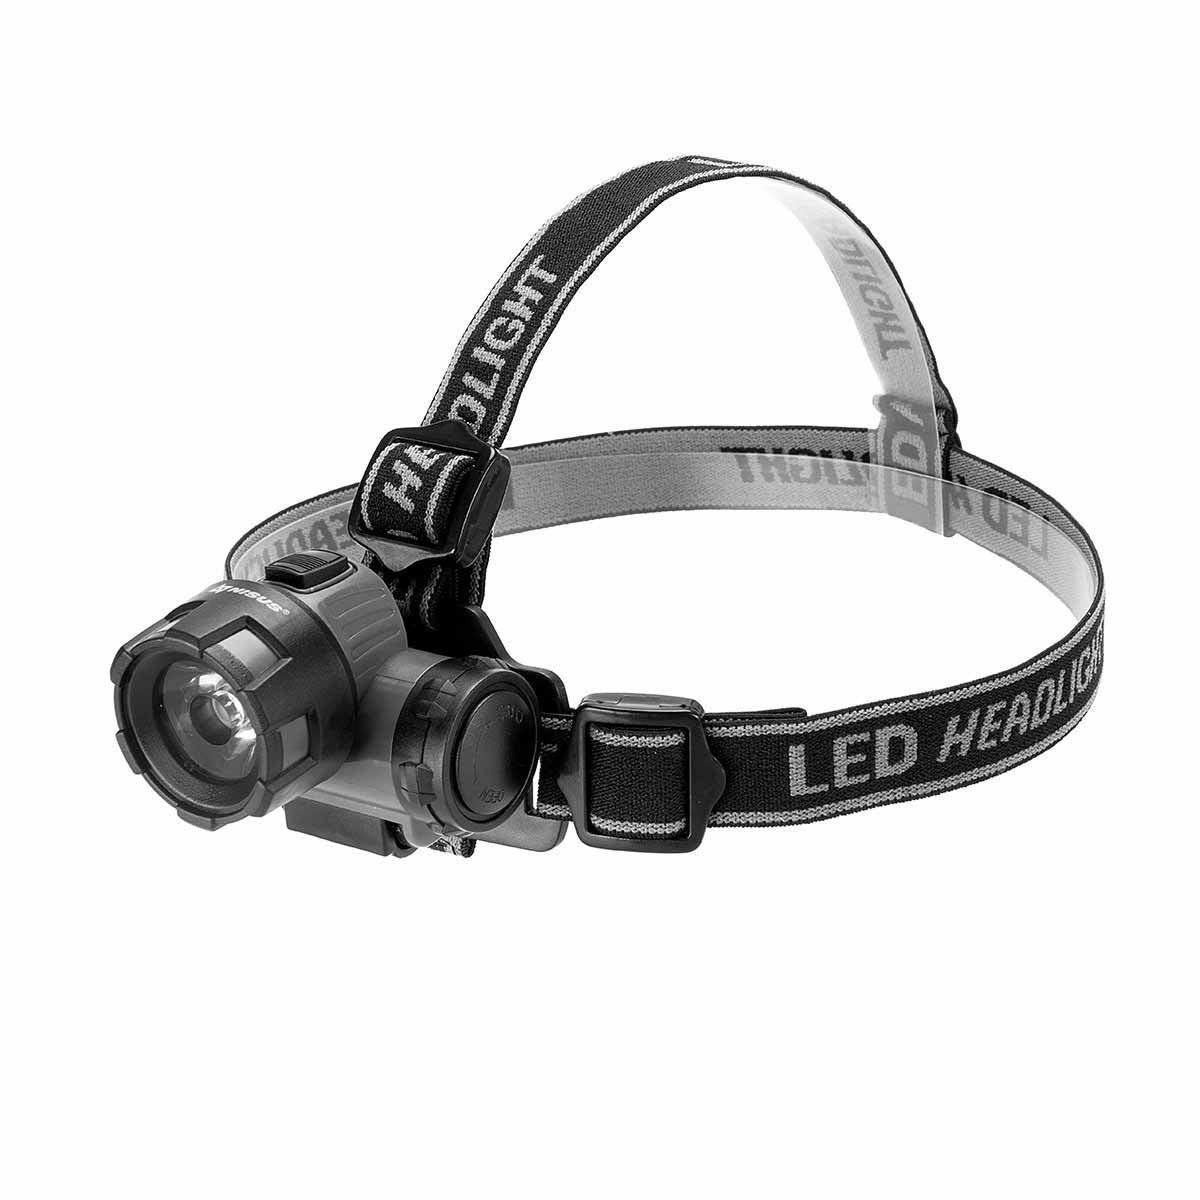 Portable LED Lightweight Headlamp for Camping